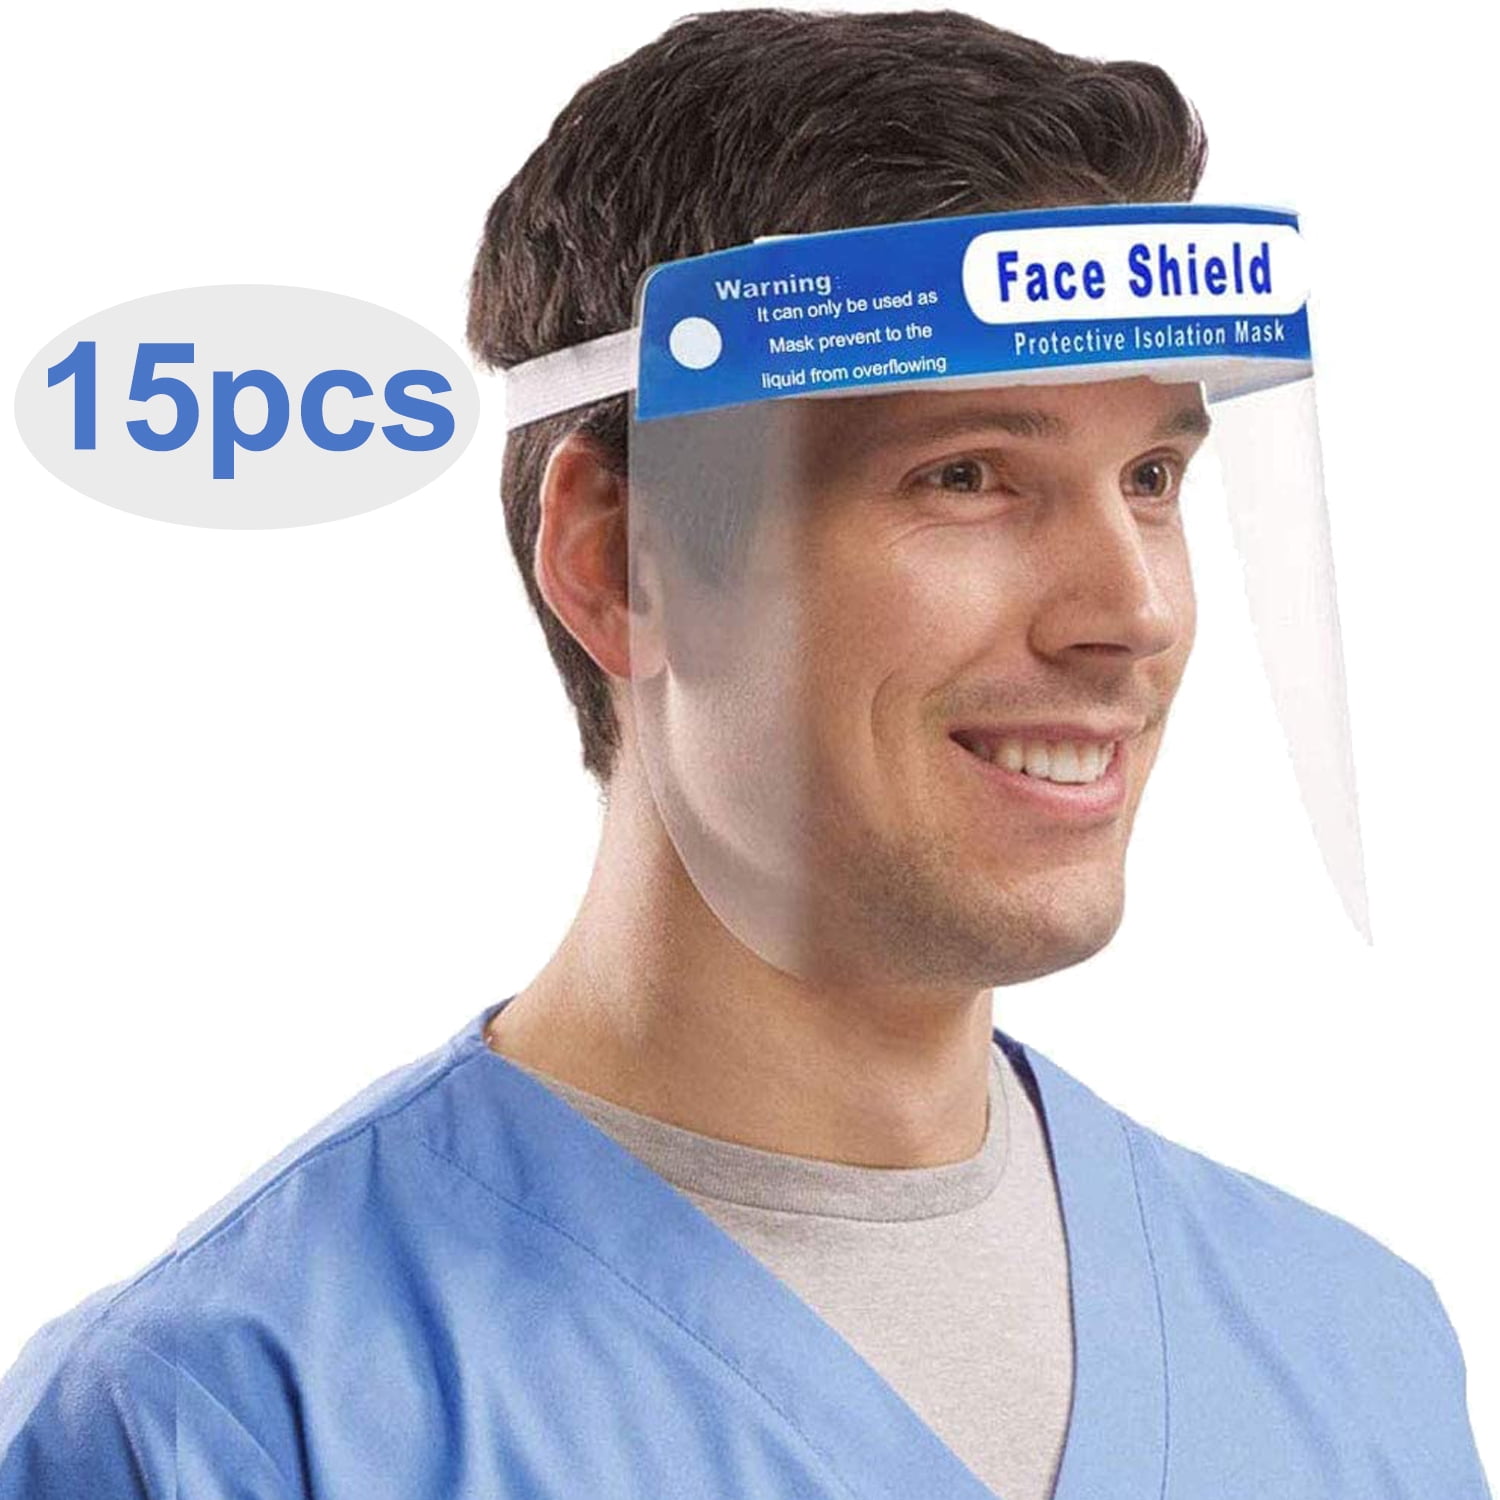 Safety Full Face Shield Clear Protector Work Industry Dental Anti-Fog 1pc 